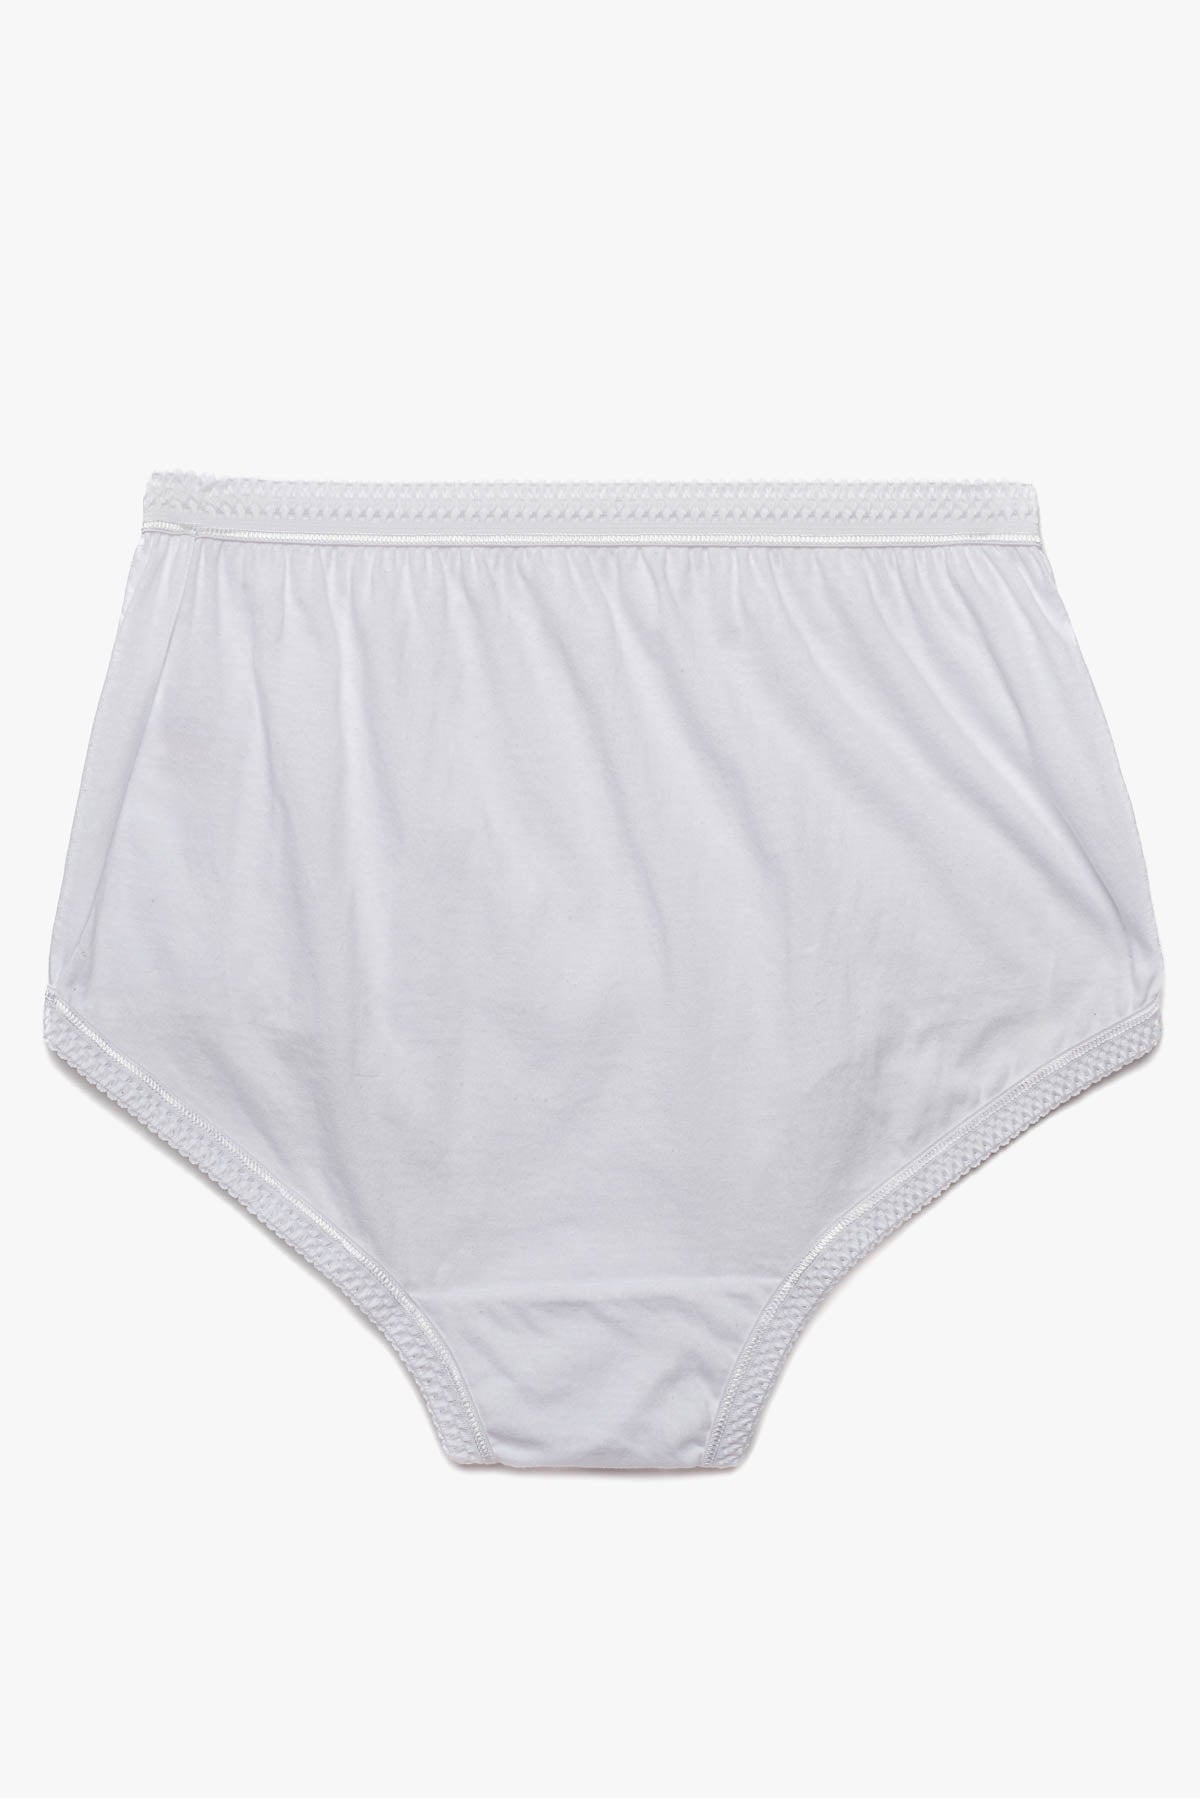 All Worthy Set of 3 Cotton Brief Panties 